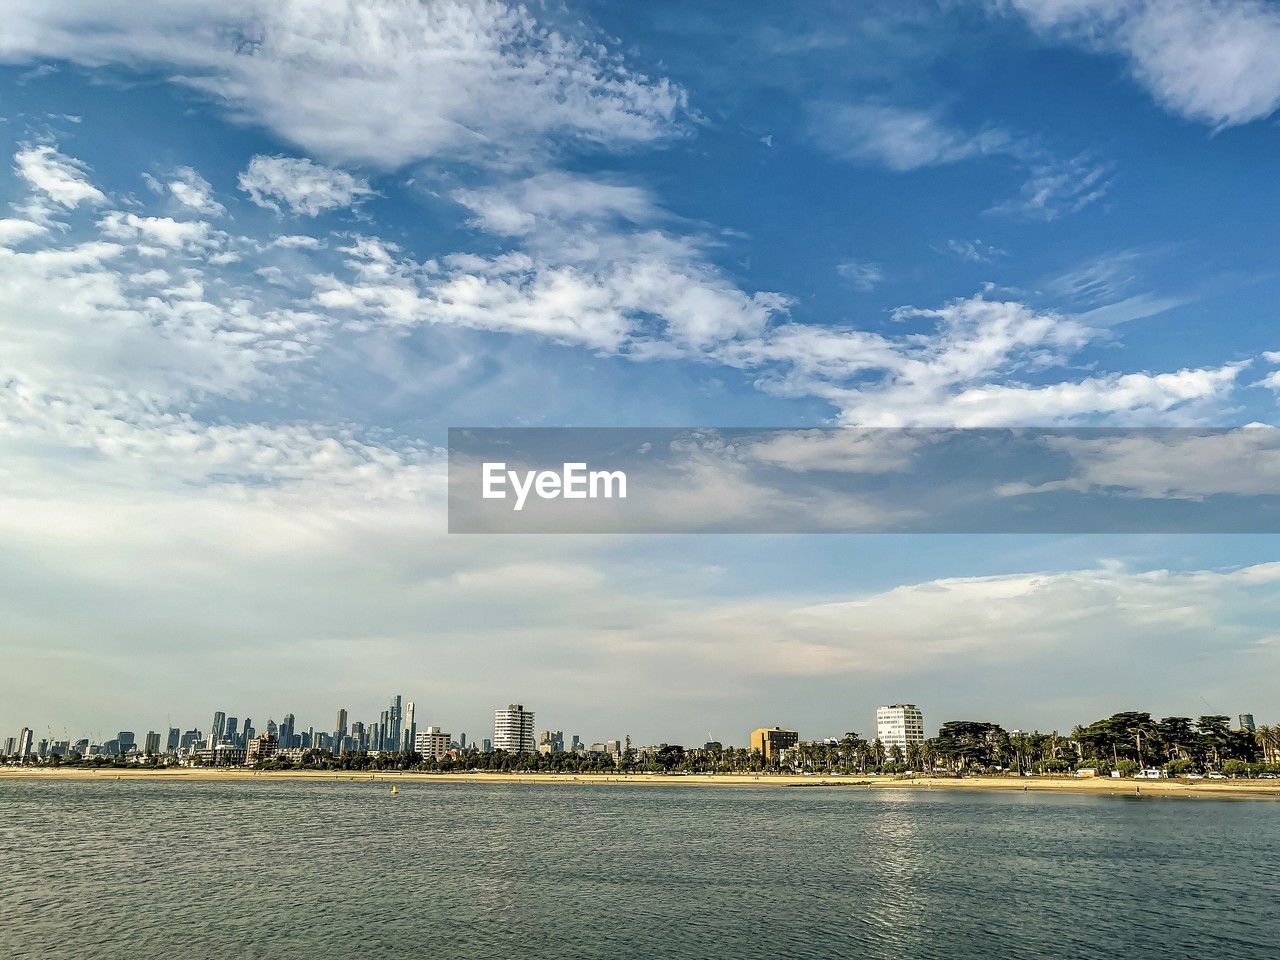 Distant view of st. kilda beachfront with buildings under blue sky with clouds and sea.